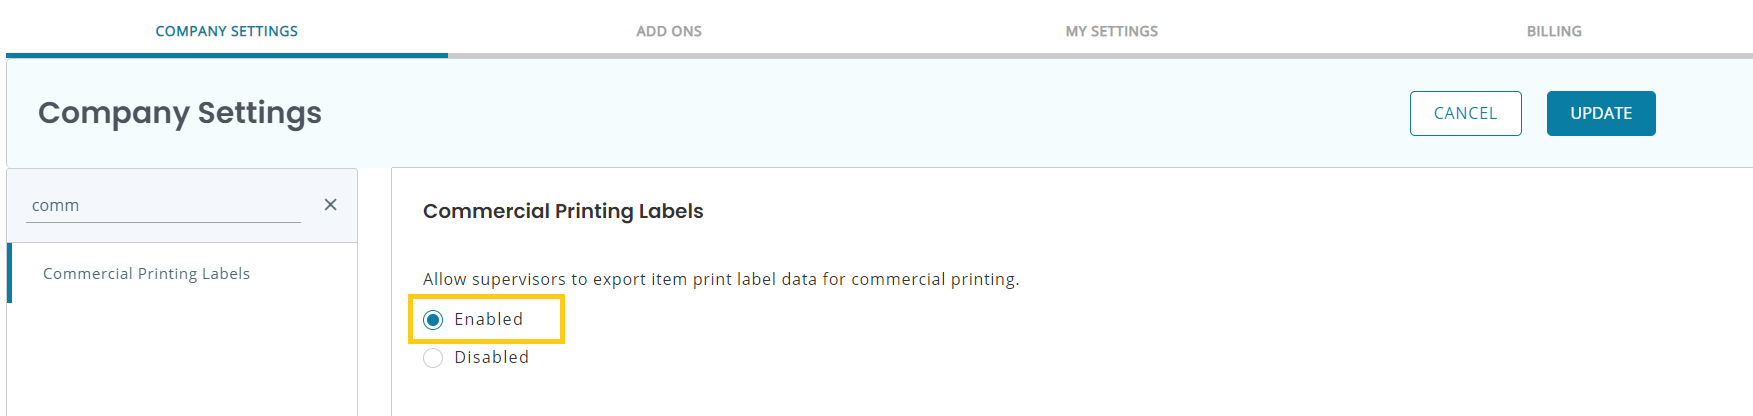 Commercial printing labels -> Enabled